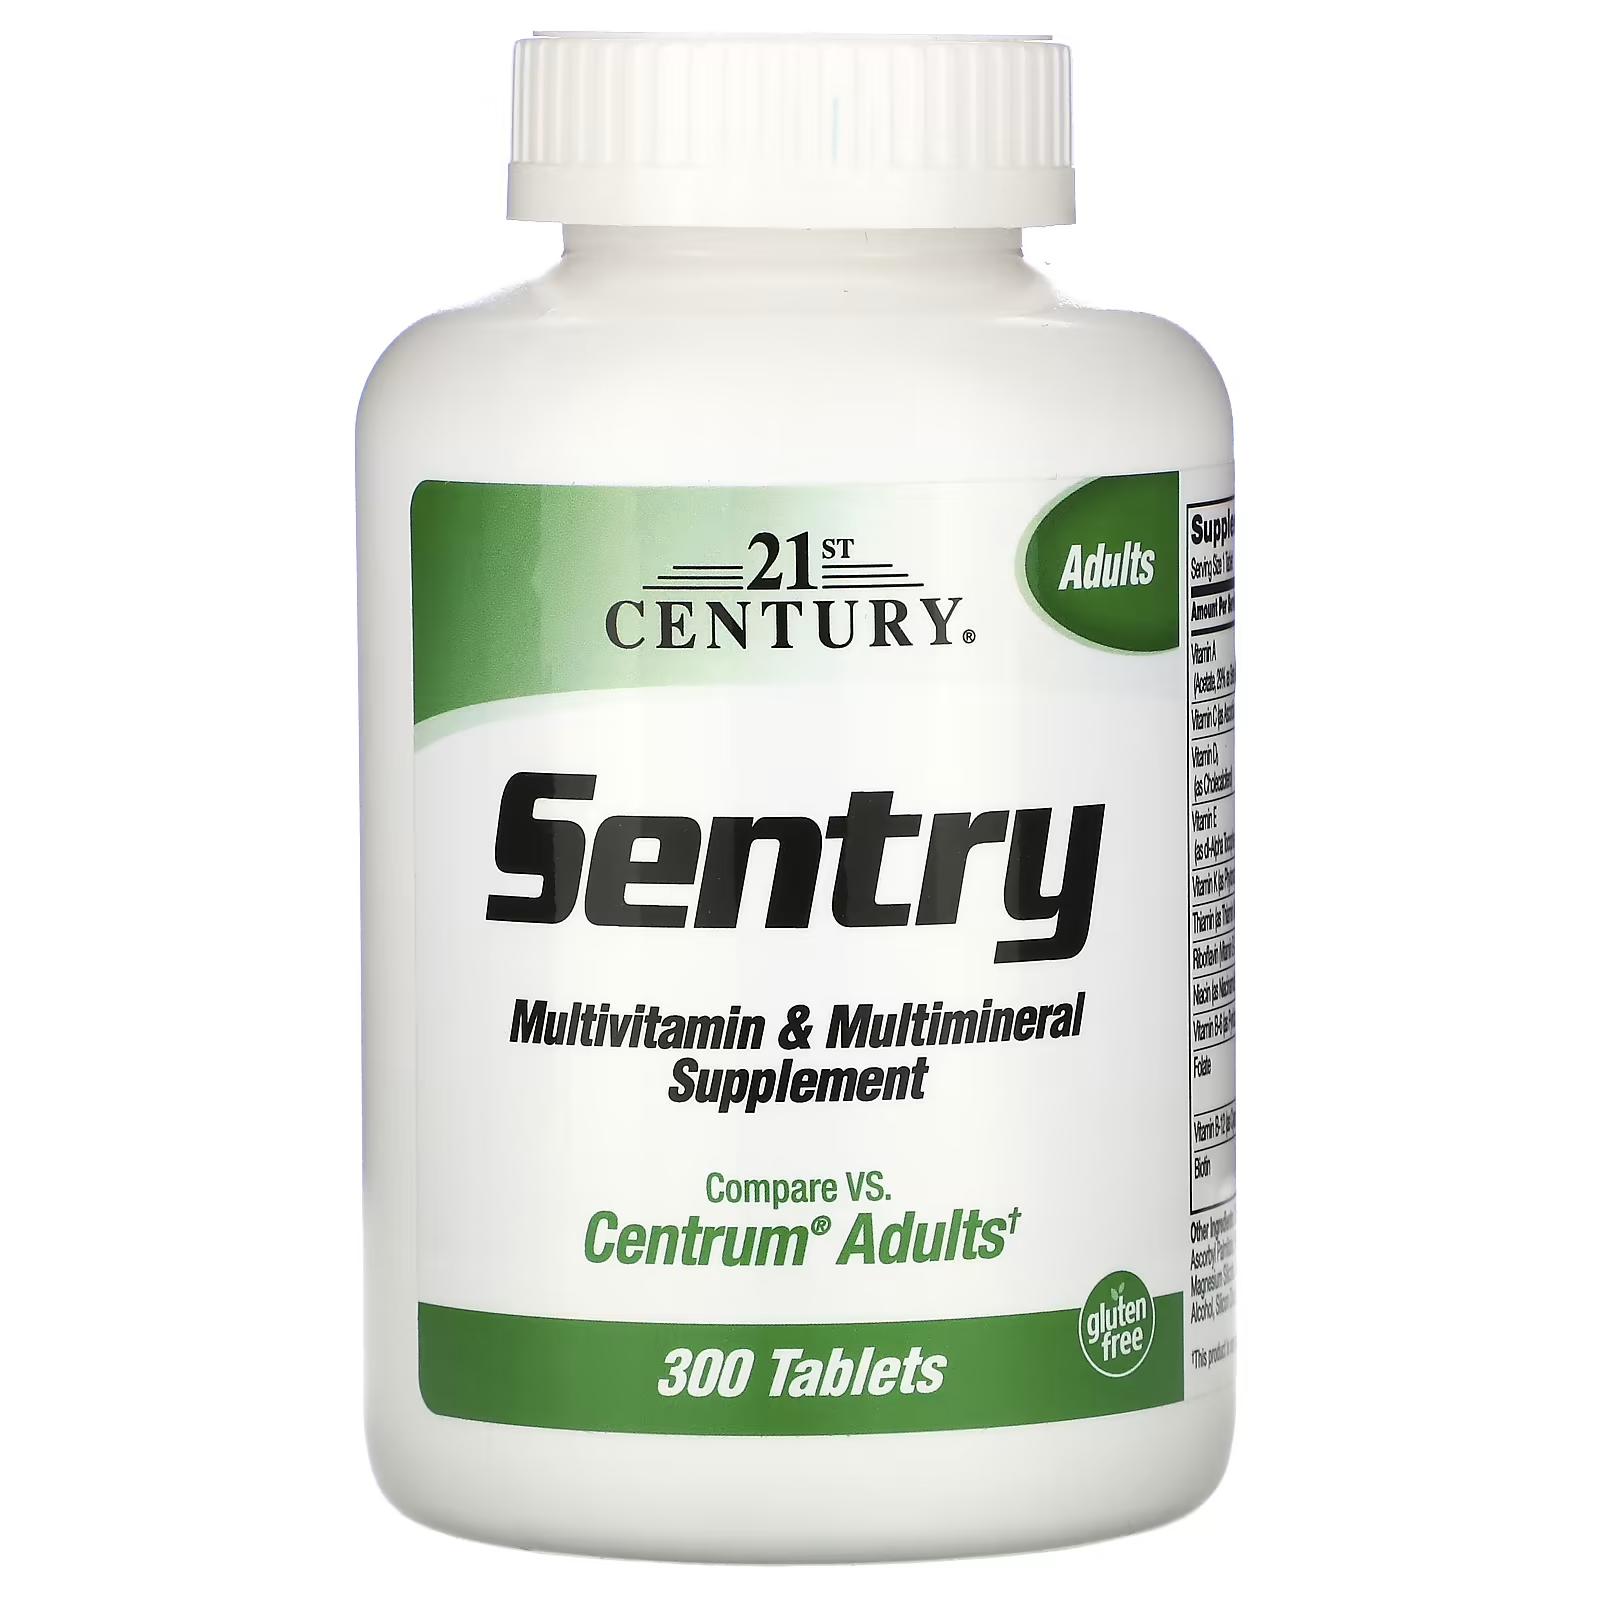 21st Century, Sentry, Adults Multivitamin & Multimineral Supplement / 300 Tablets